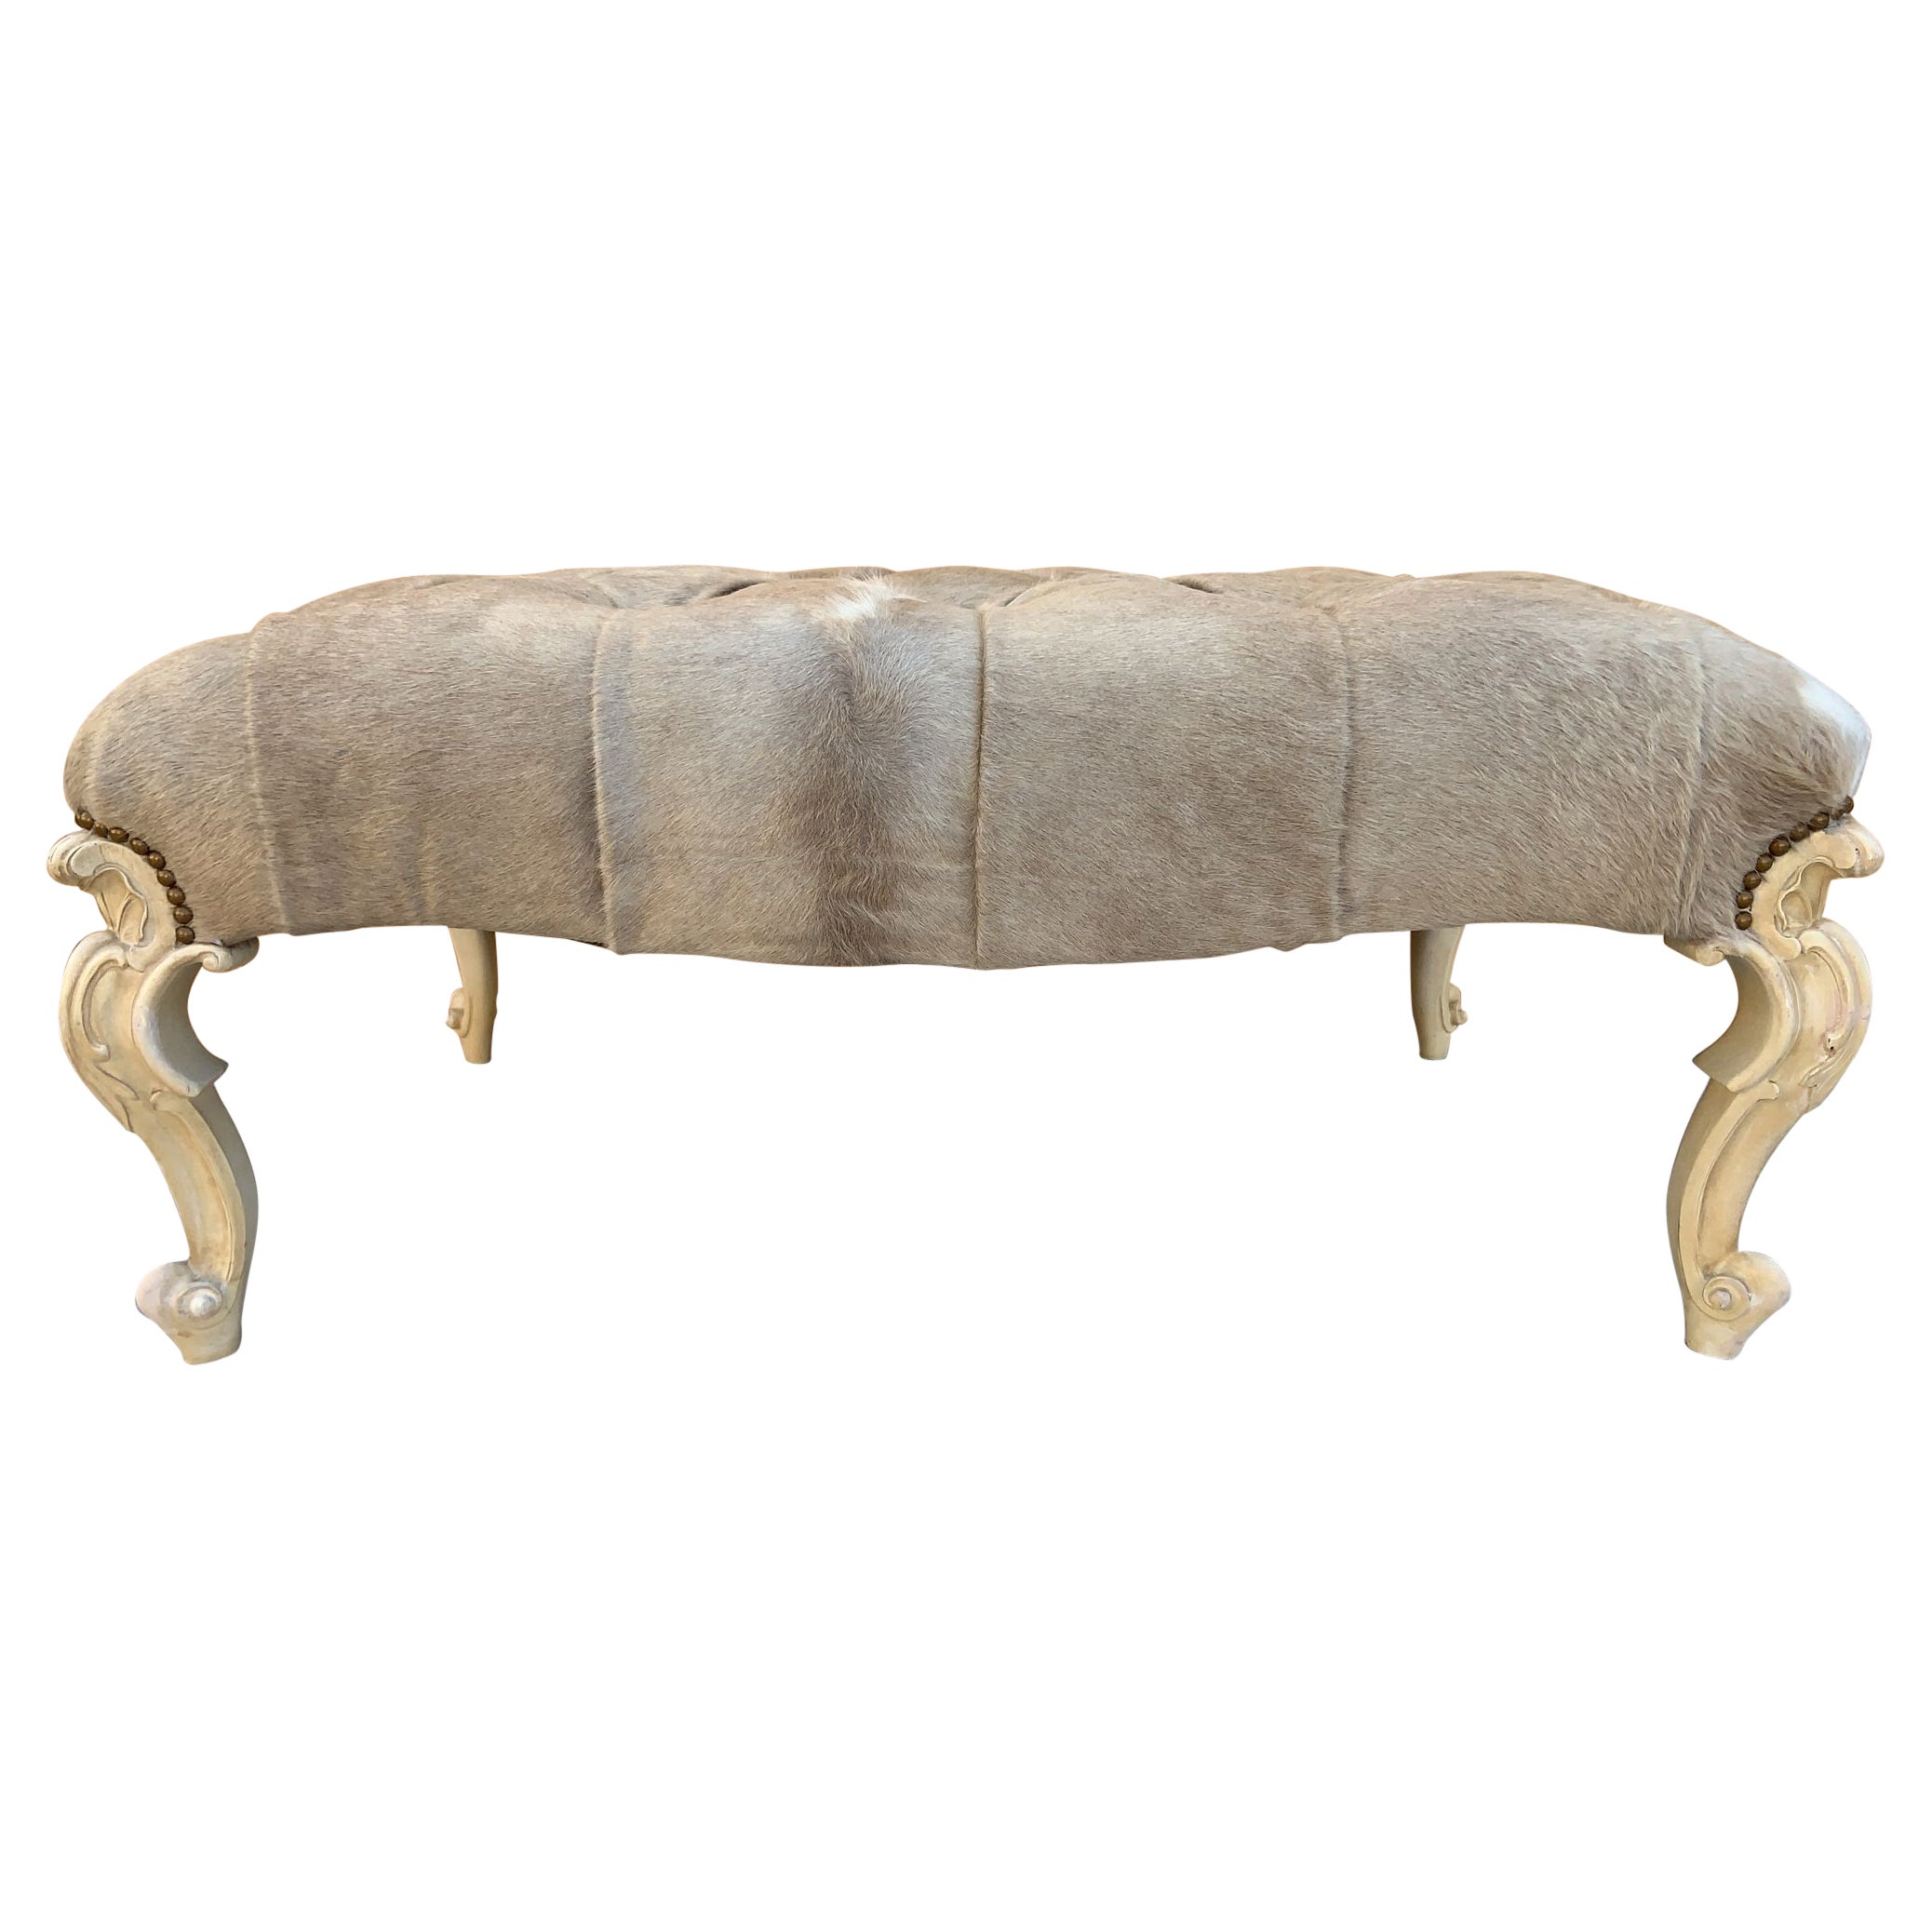 French Provincial Style Ottoman with Hand Carved Cabriole Legs Newly Upholstered For Sale